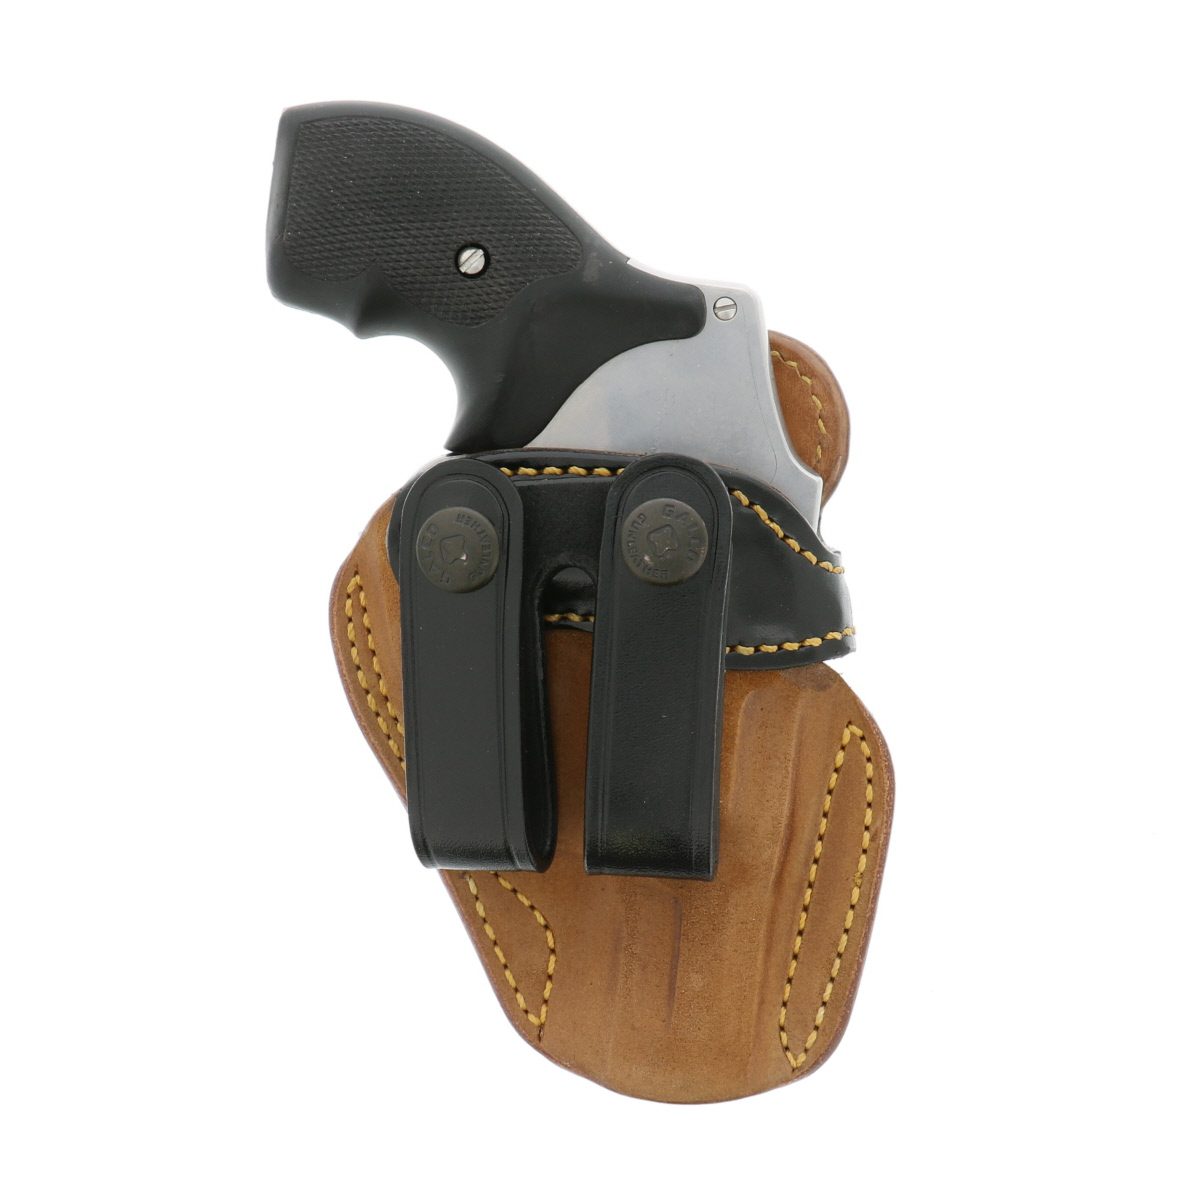 Galco Gunleather Royal Guard 2.0 Inside the Pant Holster (Black) - Tactical & Duty Gear